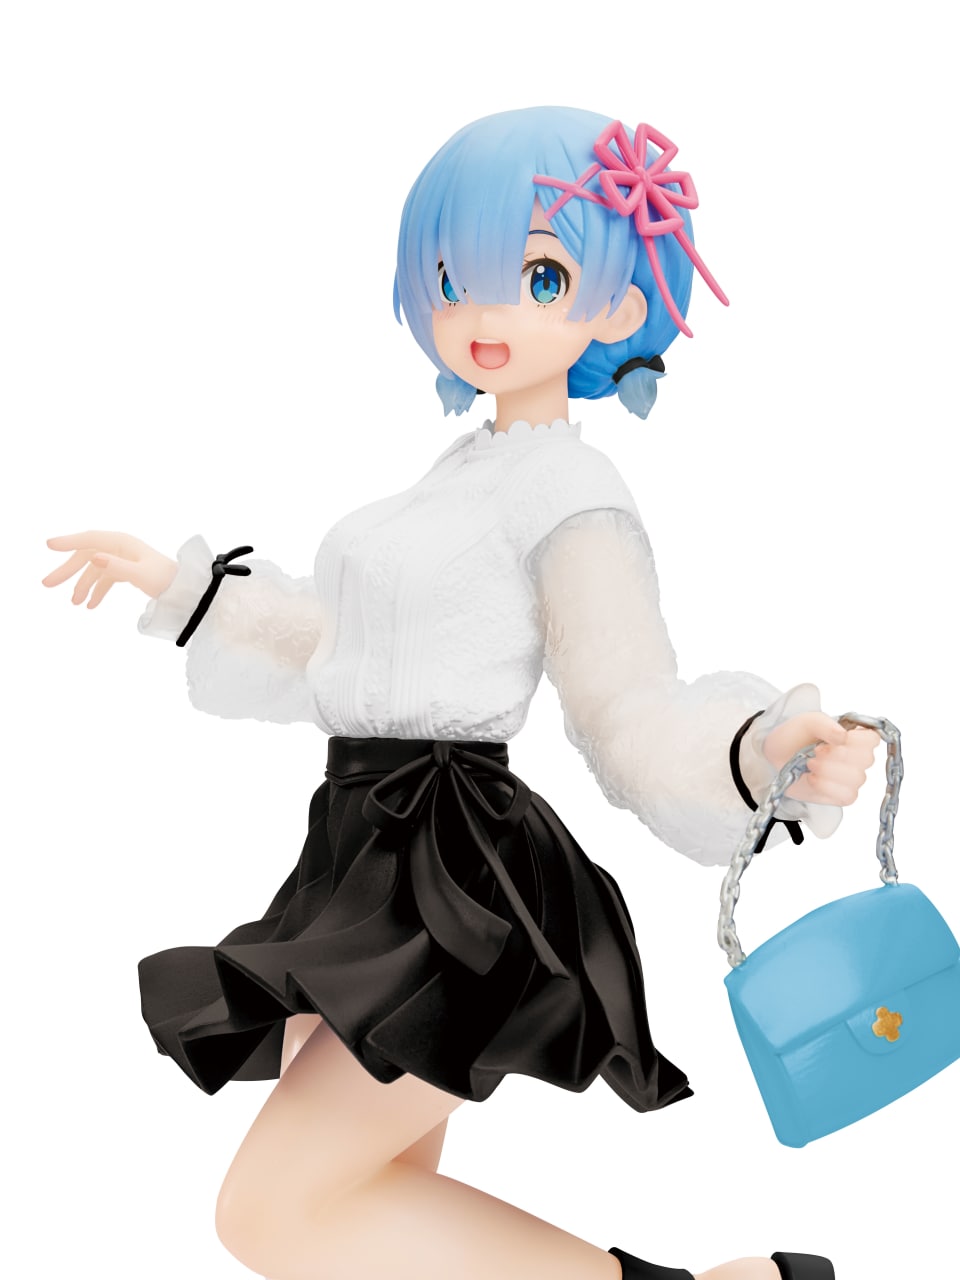 PRE-ORDER Re:Zero: Starting Life in Another World Precious Figure - Rem Outing Coordination Ver. (Renewal)